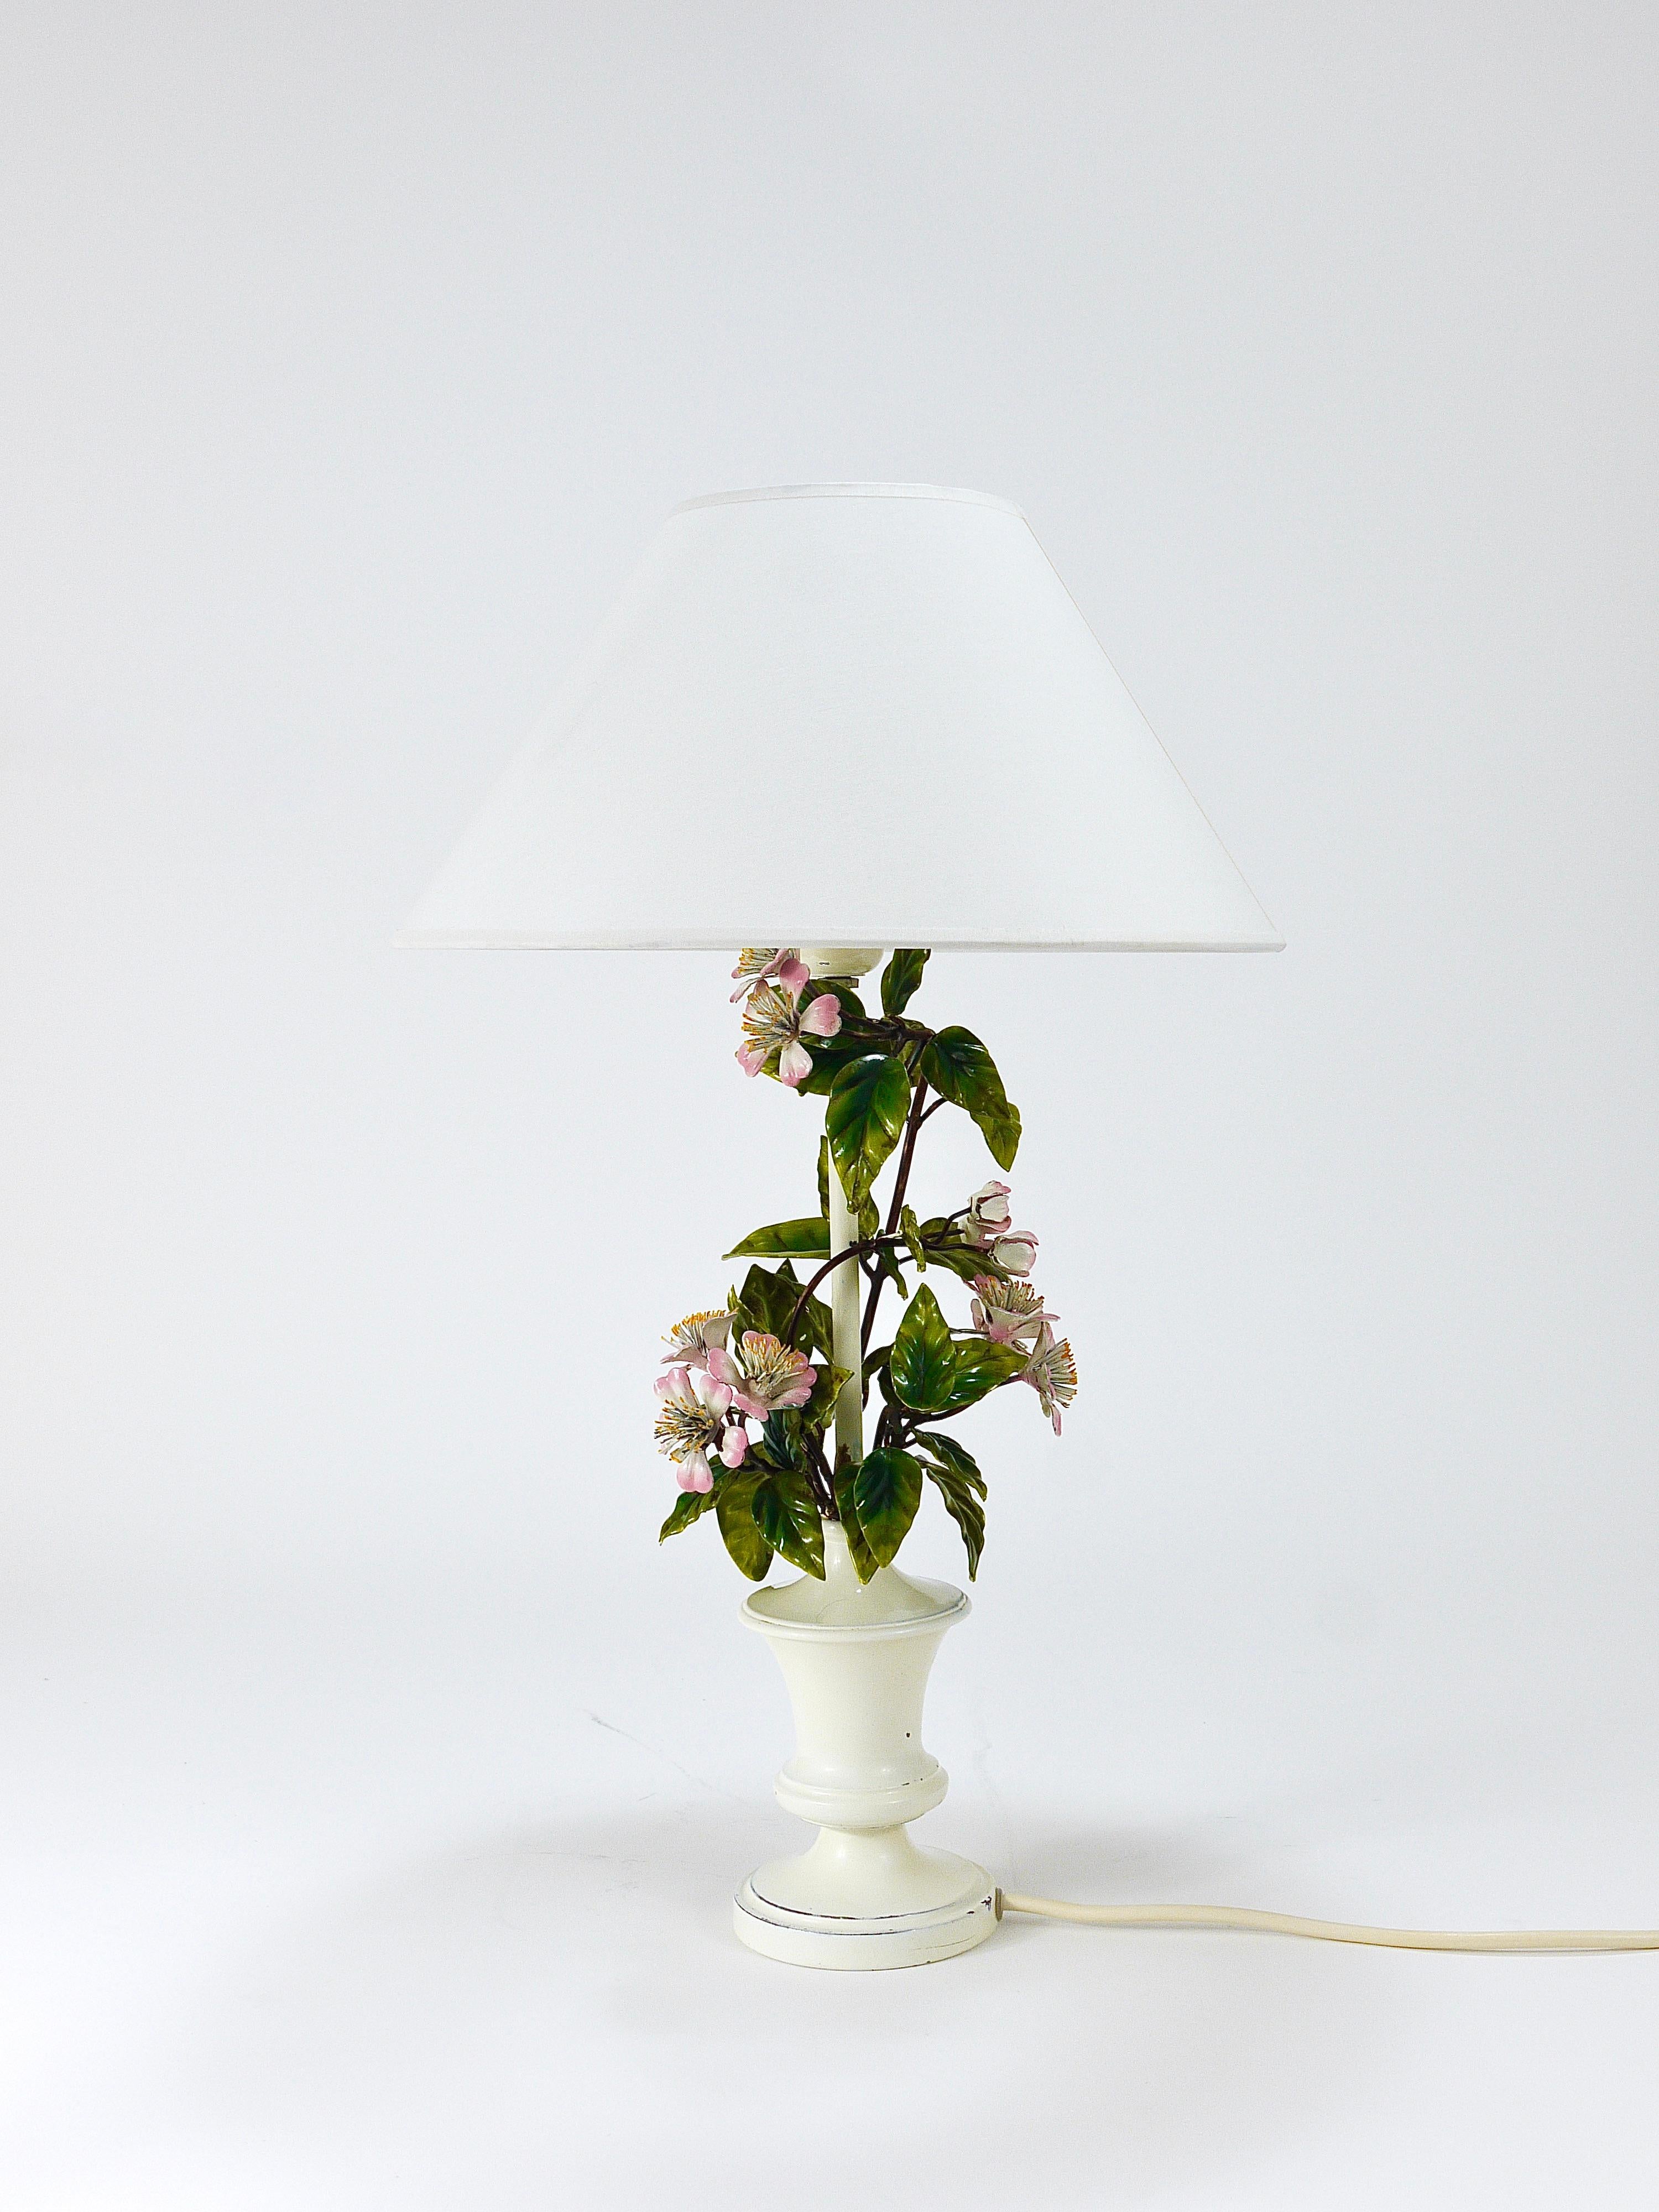 Salvadori Hand Painted Wild Apple Blossom Toleware Table Lamp, Italy, 1950s For Sale 4